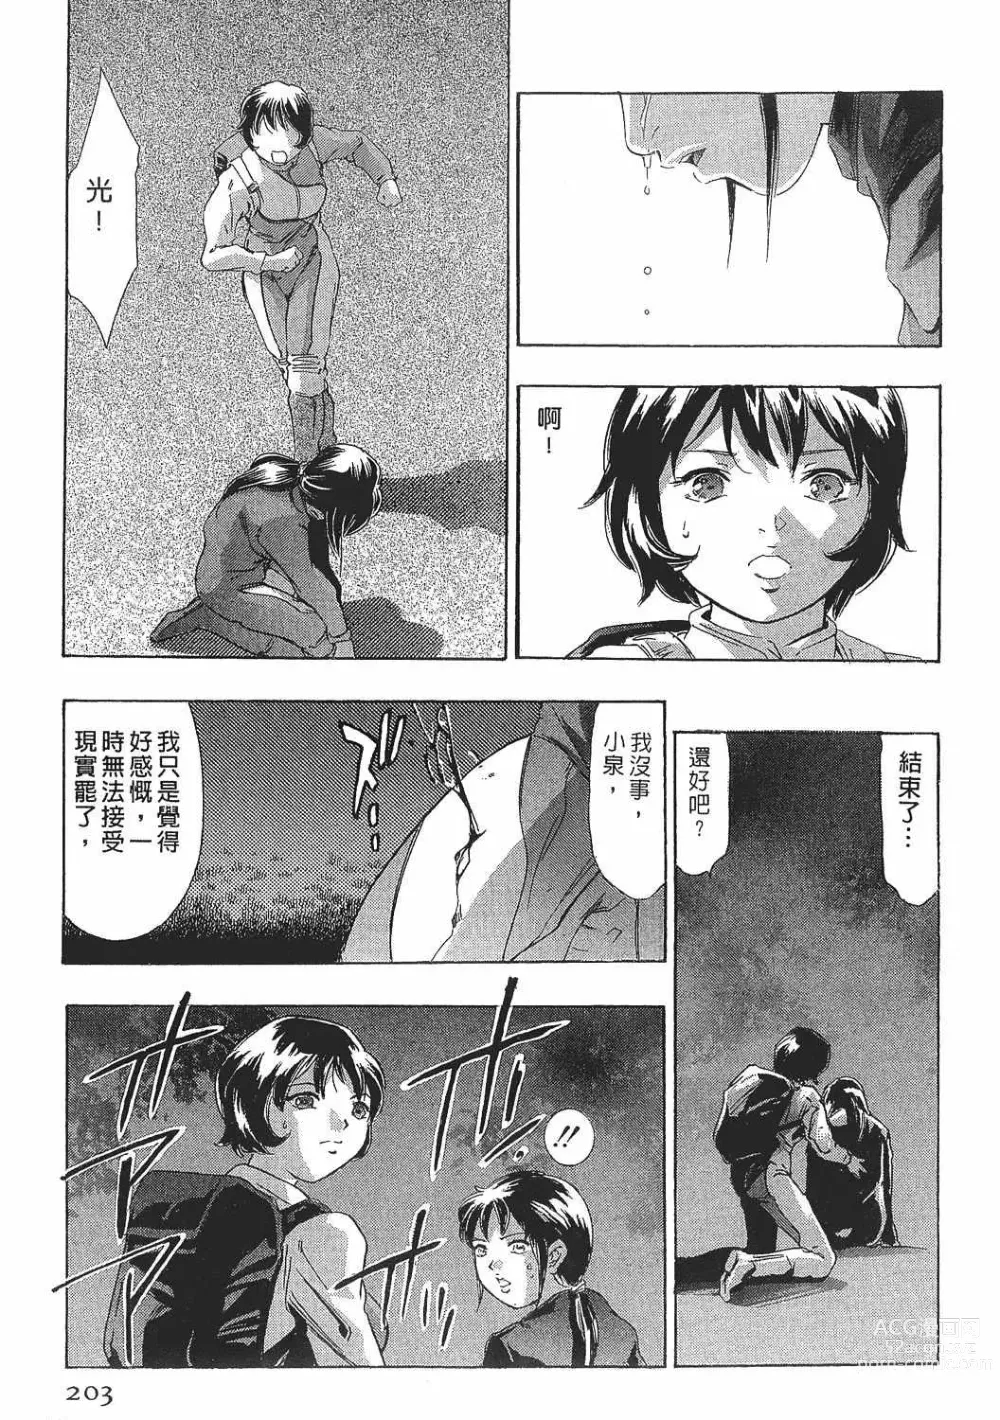 Page 201 of manga Mehyou - Female Panther Vol. 8